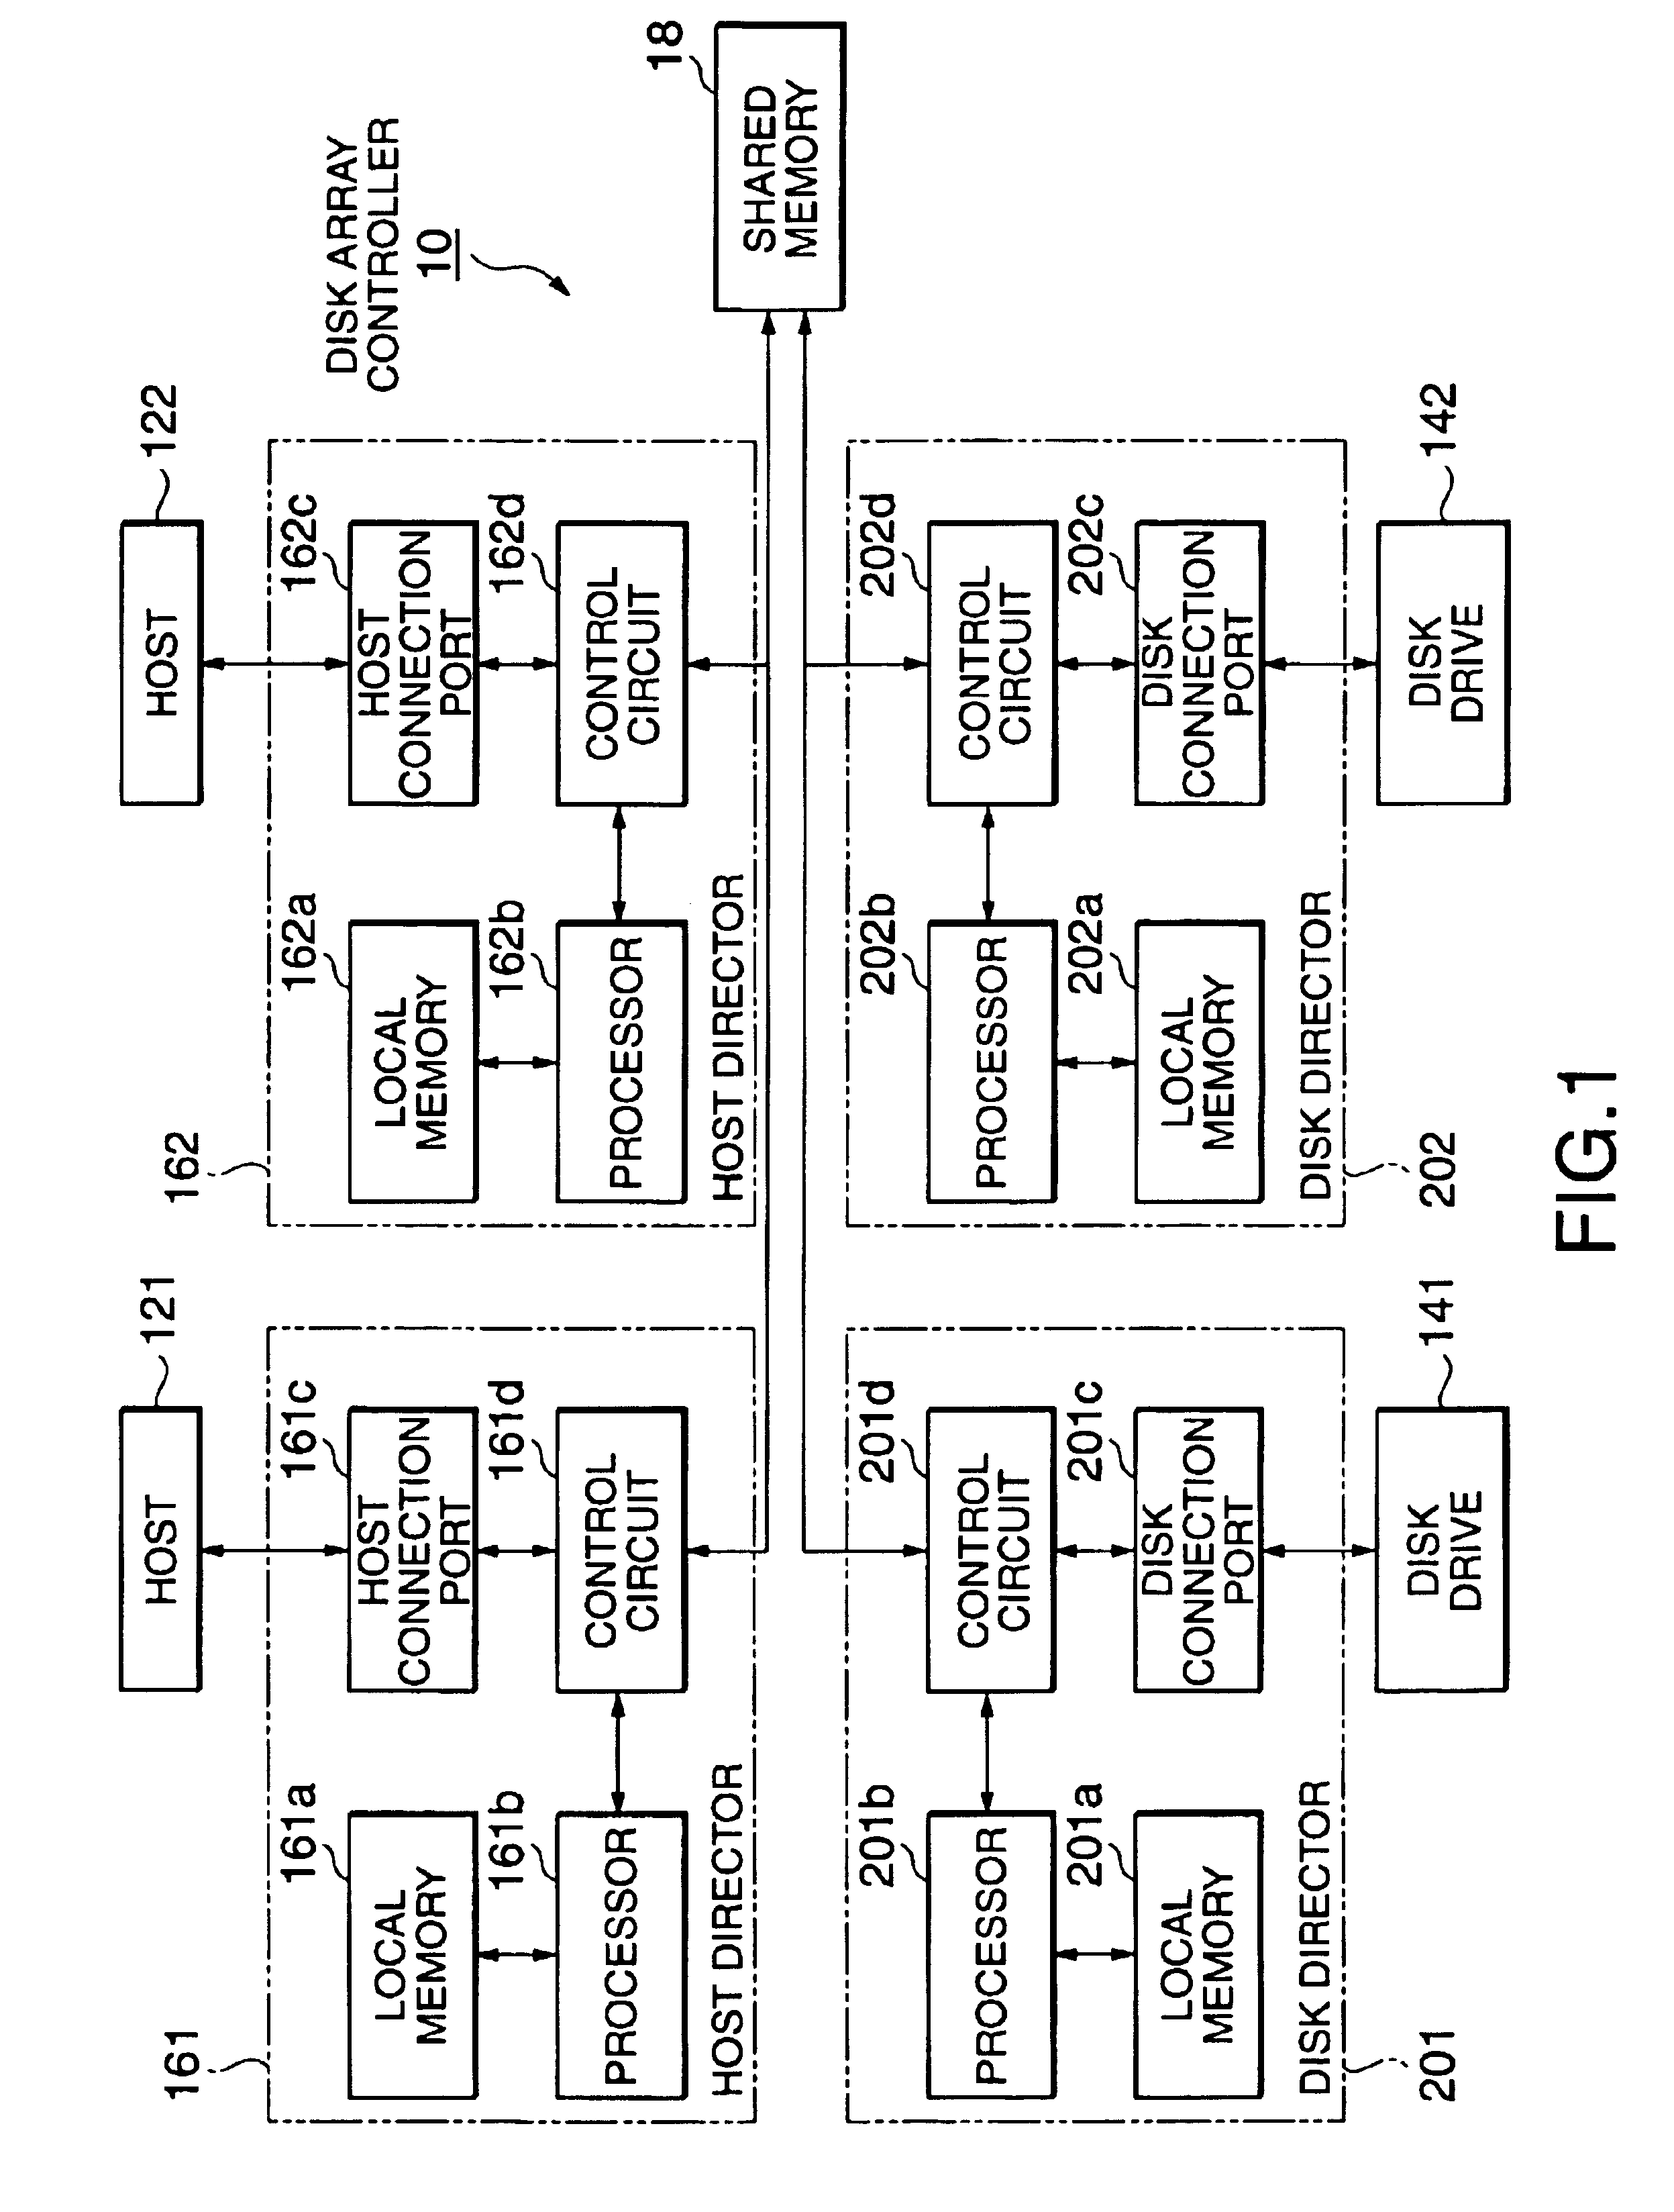 Disk cache control for servicing a plurality of hosts